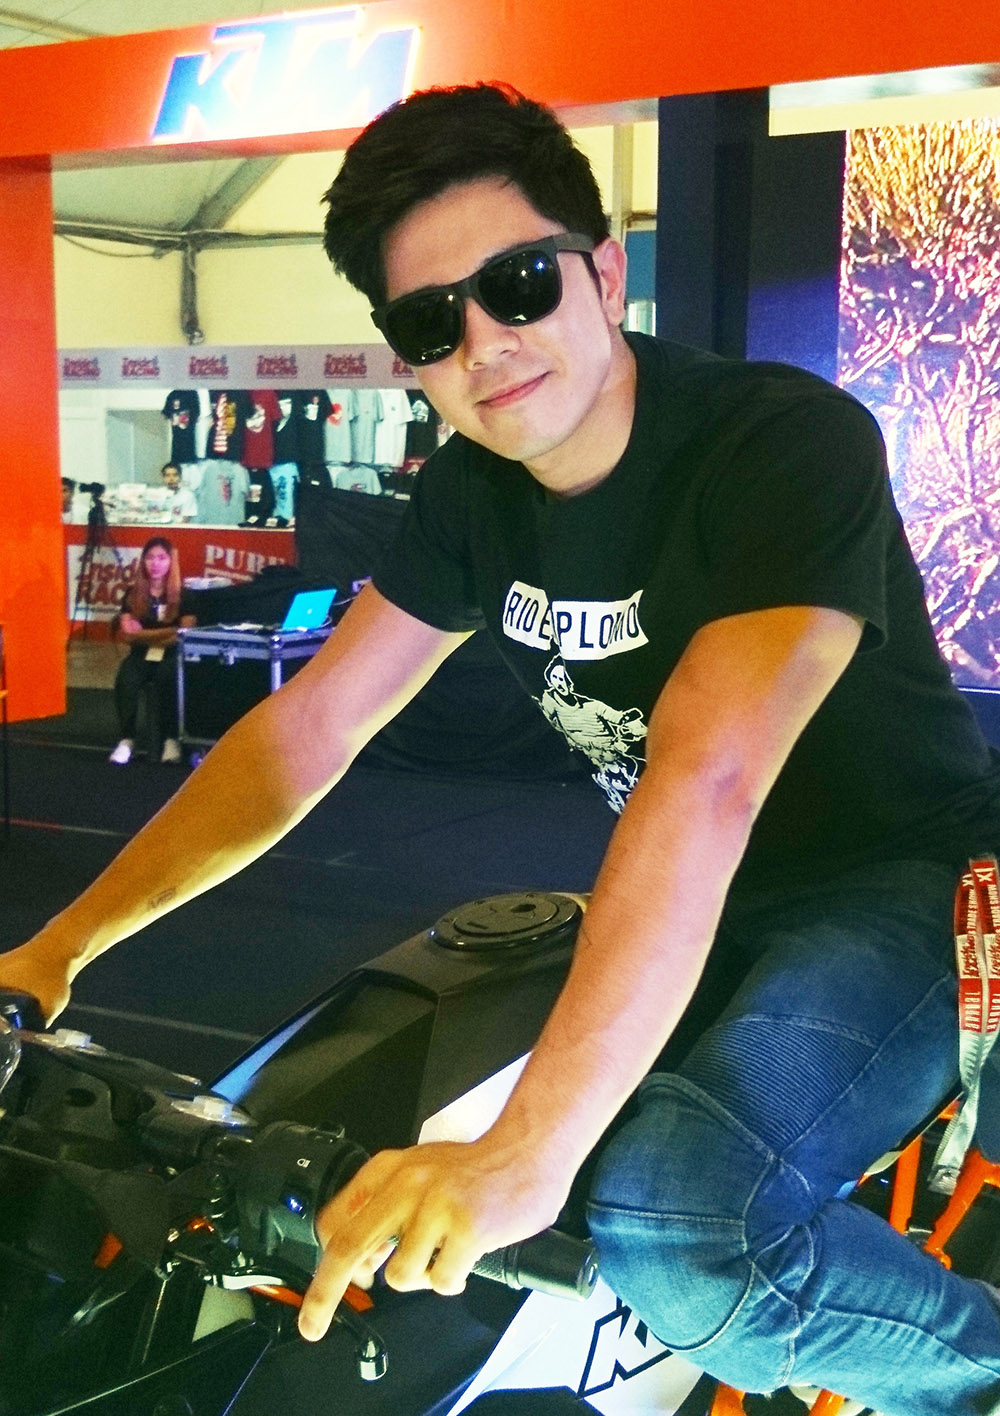 Paulo Avelino checks out KTM Philippines at the IR Bike Festival